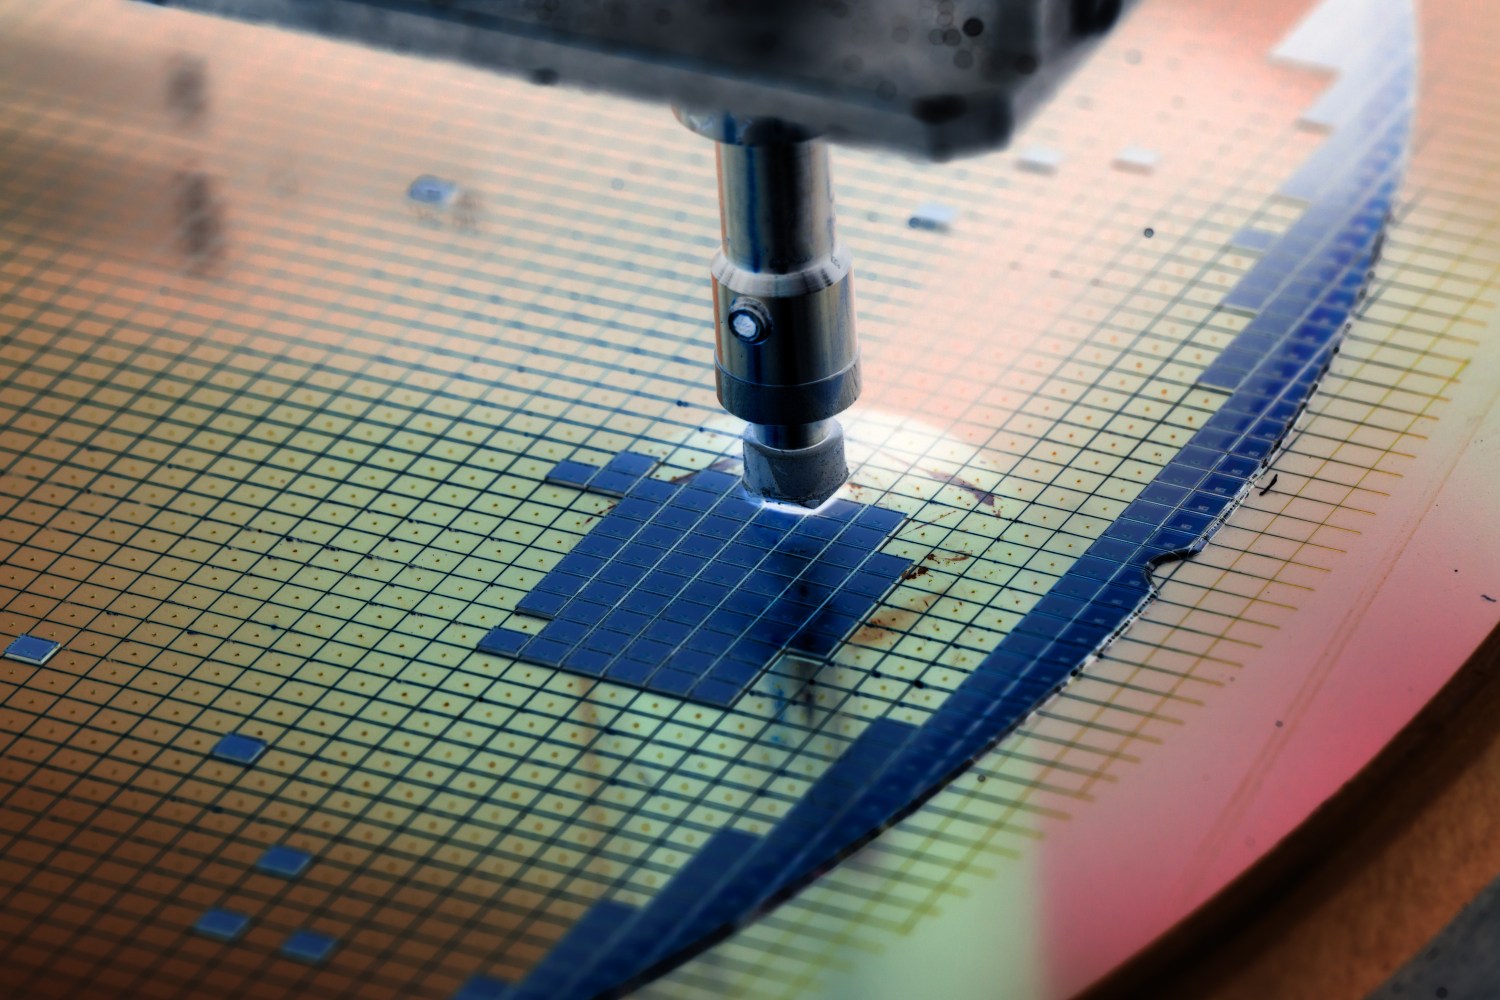 silicon wafer in die attach machine in semiconductor manufacturing